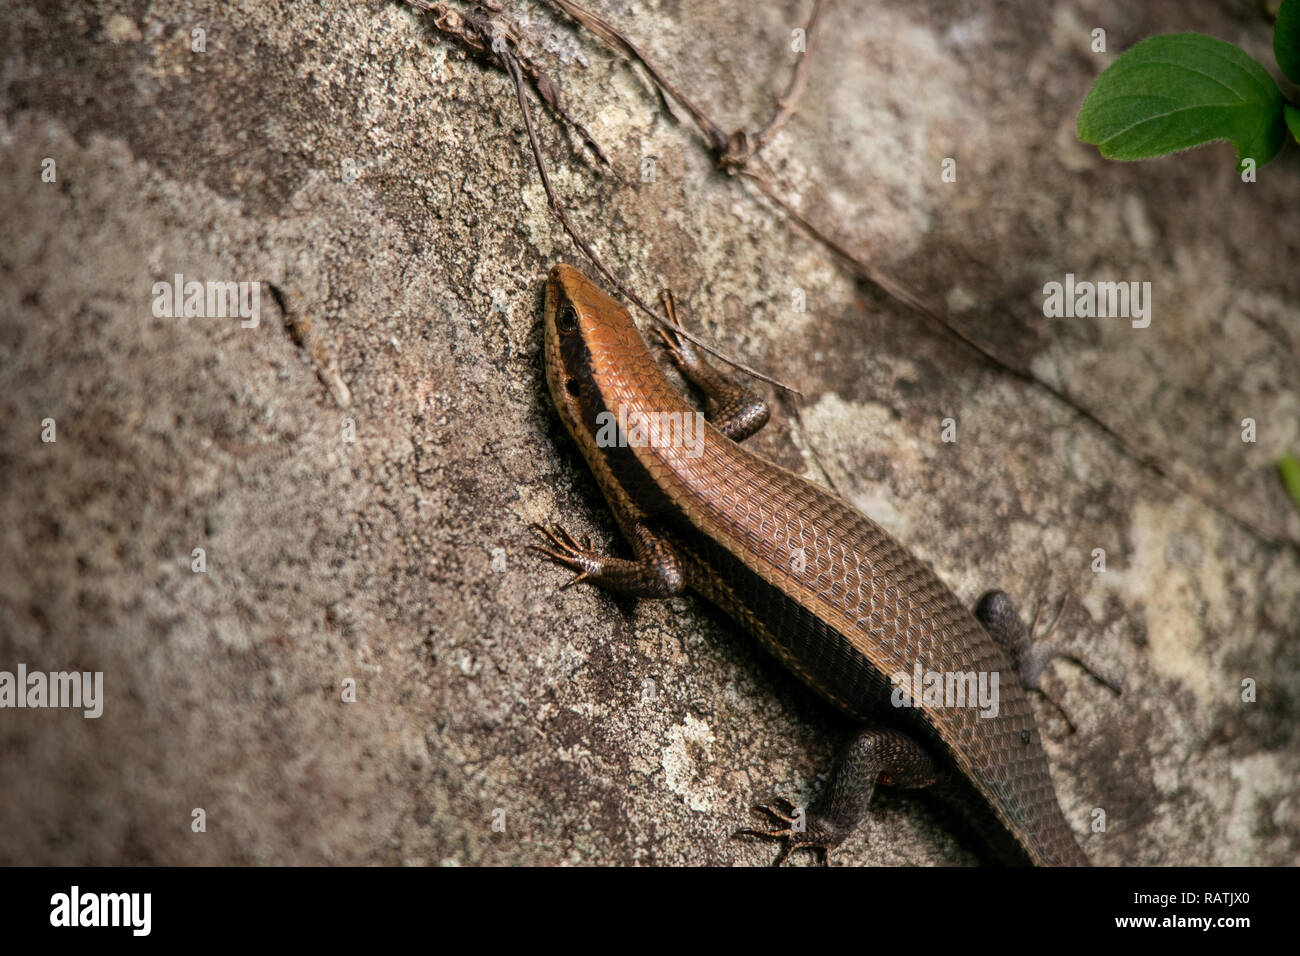 A close up of a snake like copper brown skink lizard paused on a large rock. Stock Photo